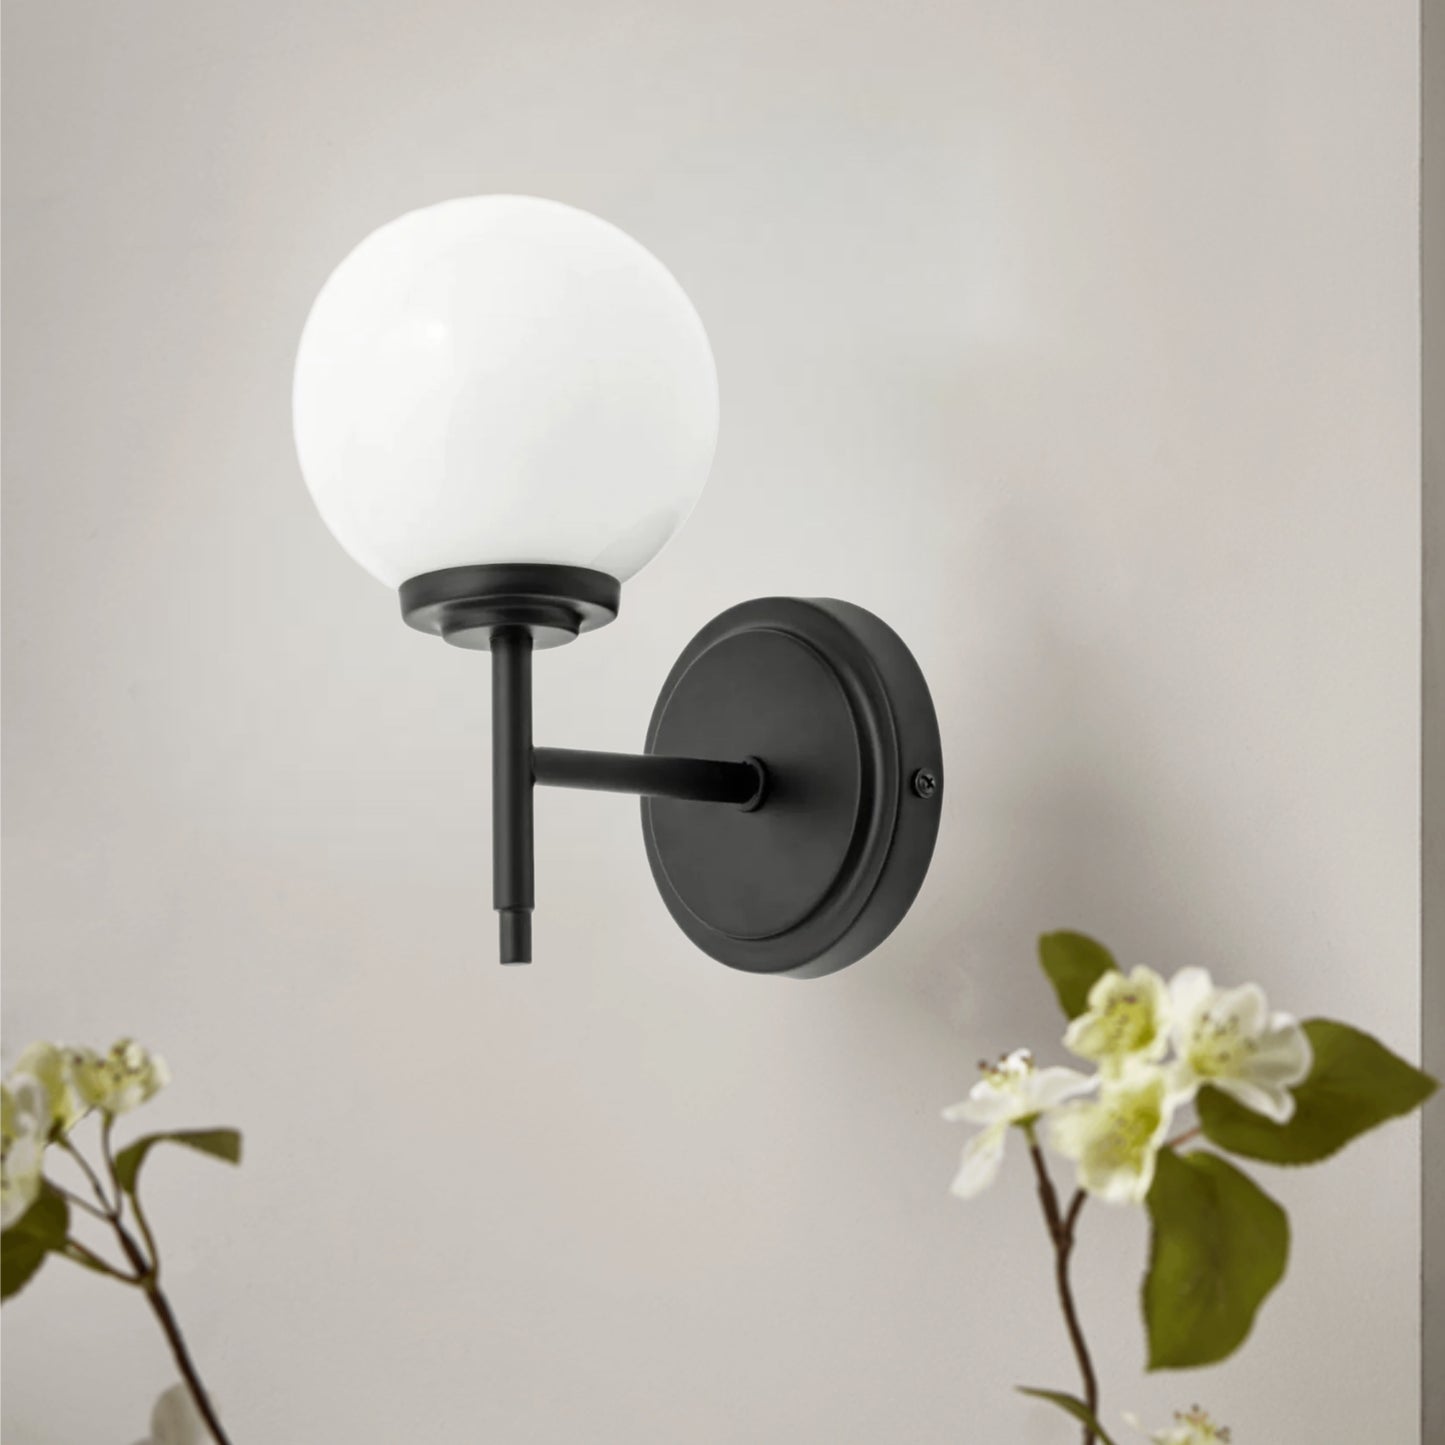 Our Marley globe armed wall light is a stylish light fitting ideal for the modern home and can be used in the bathroom. It features a matt black effect round ceiling plate and a globe opal glass shade mounted on a black arm.